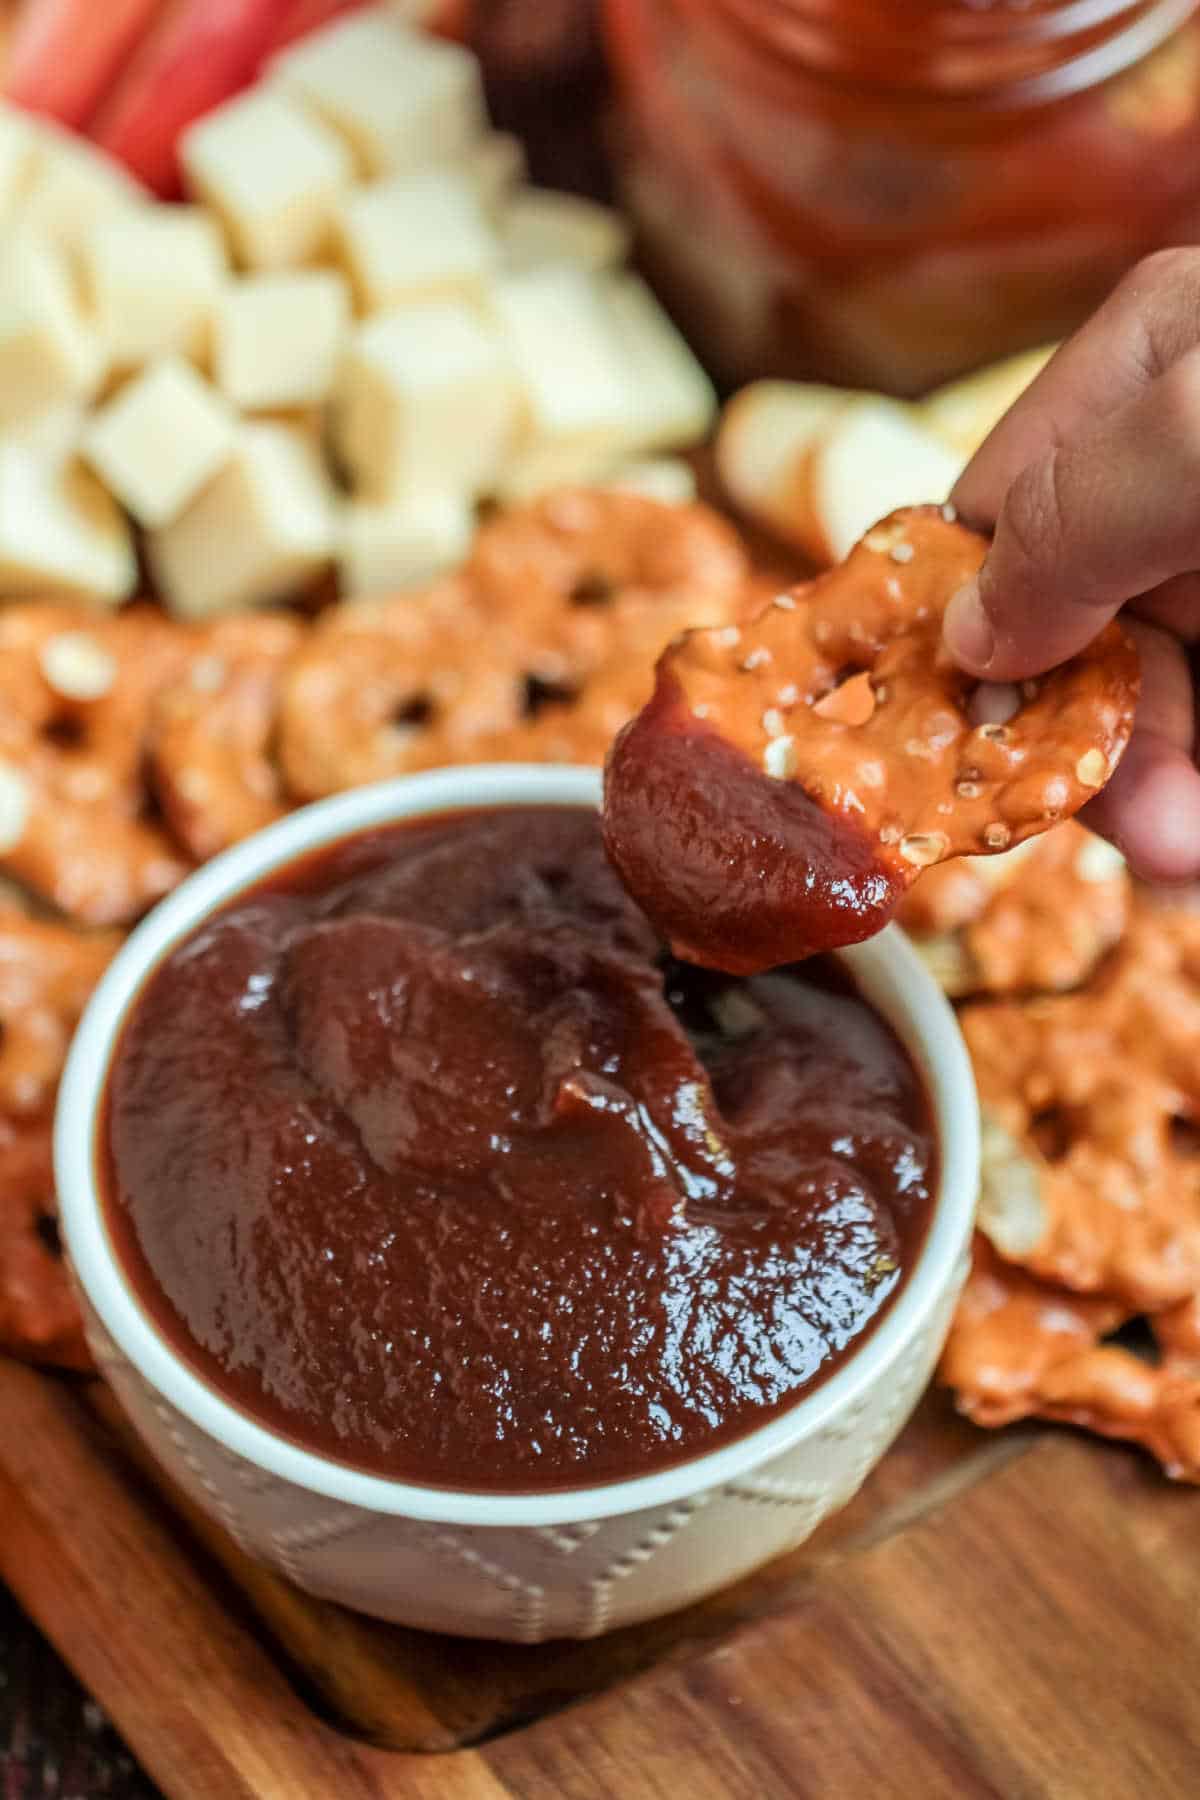 A hand dipping a pretzel in a bowl of apple butter.